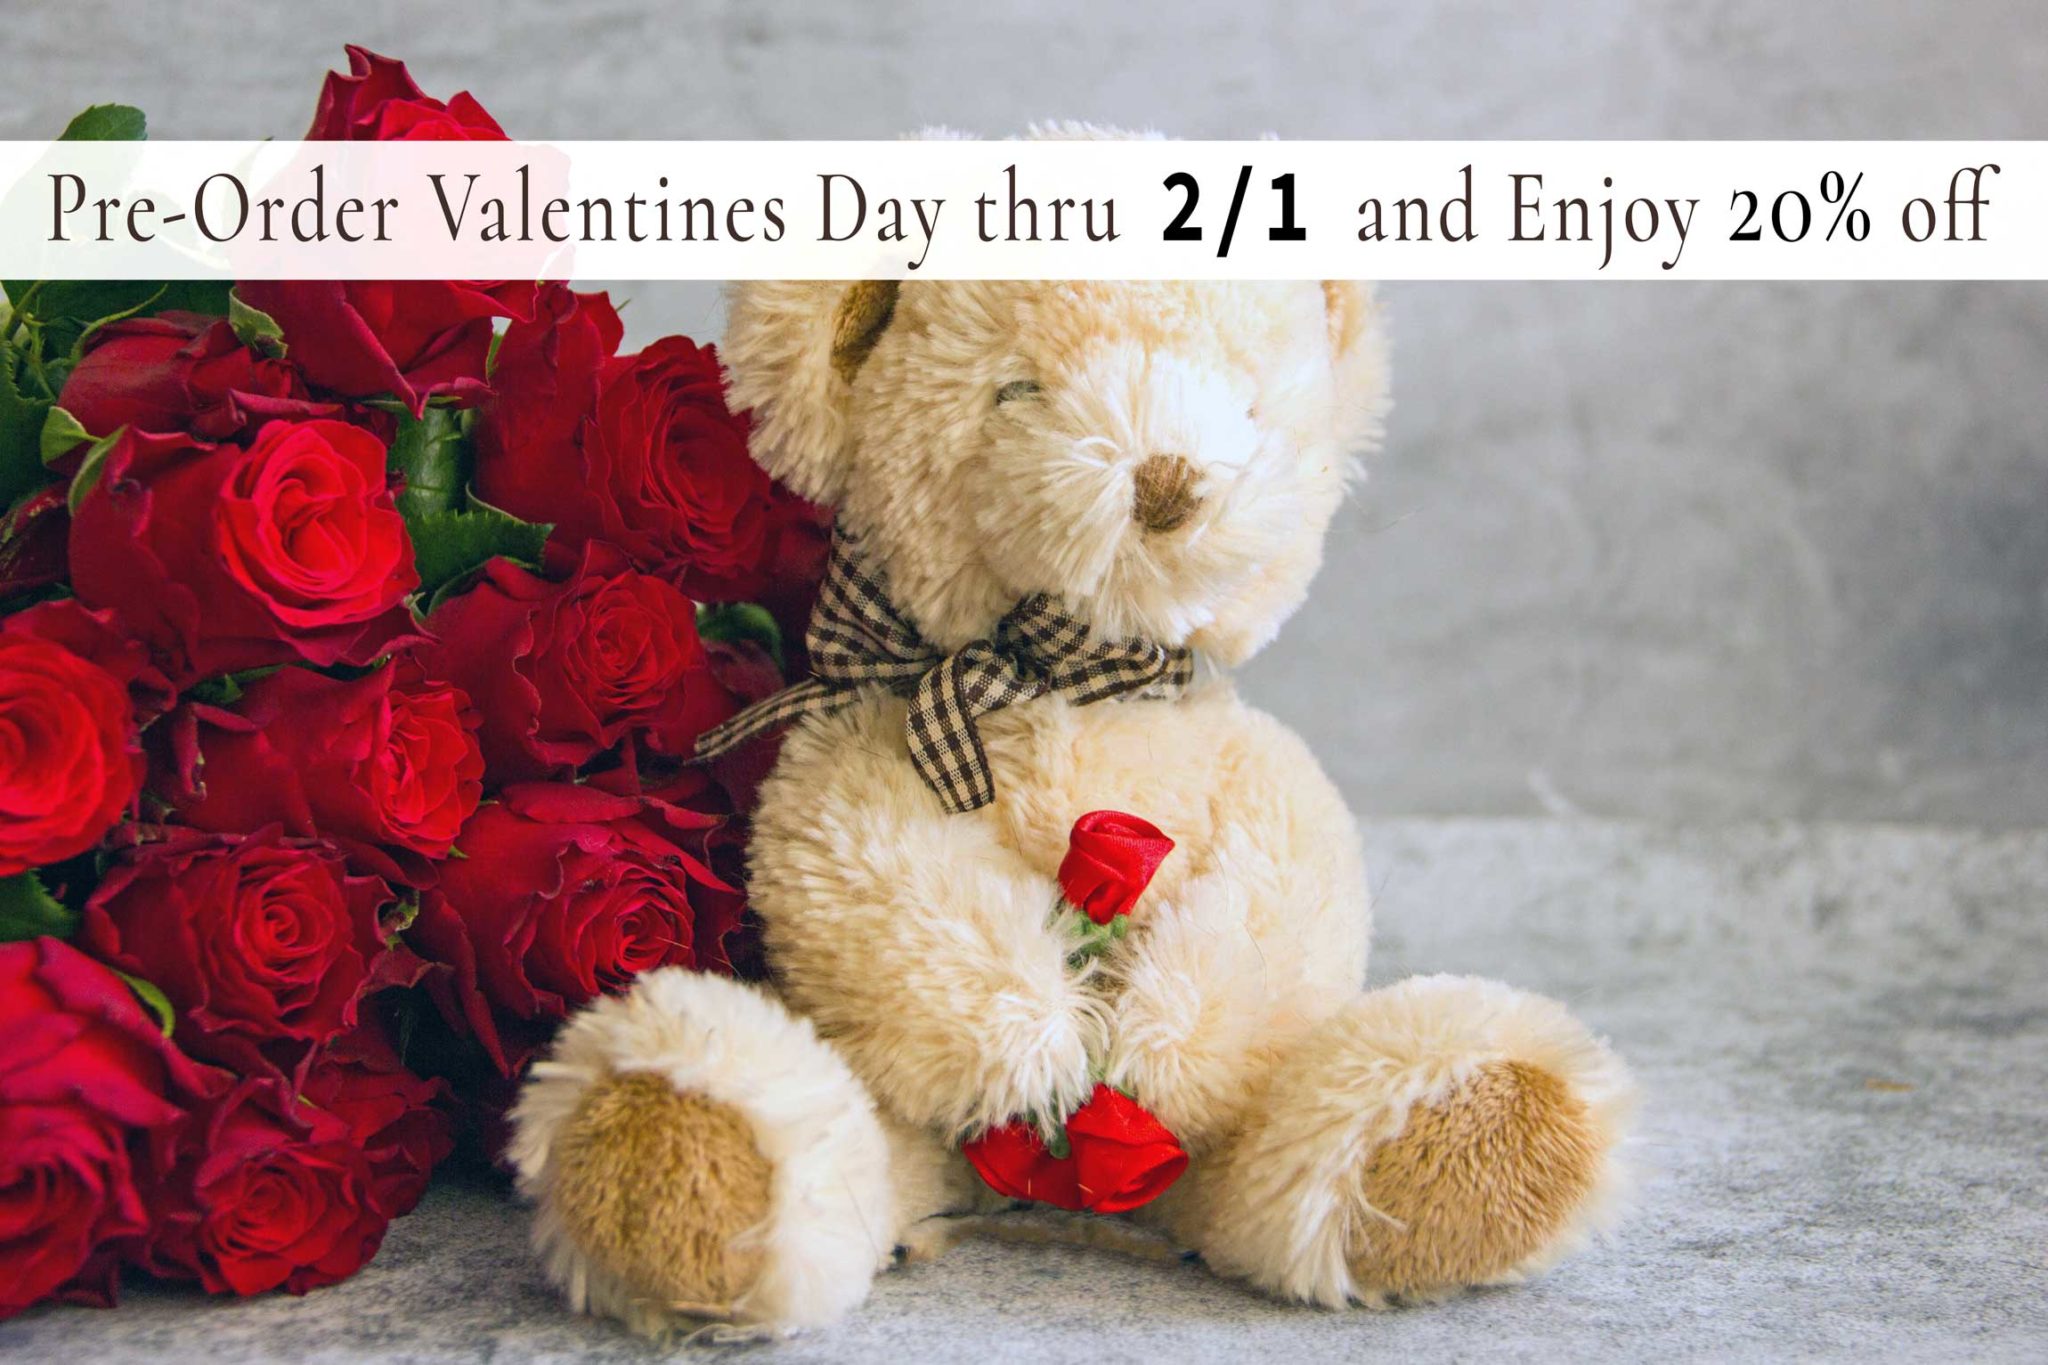 Teddy Bear And Roses for Valentines Day